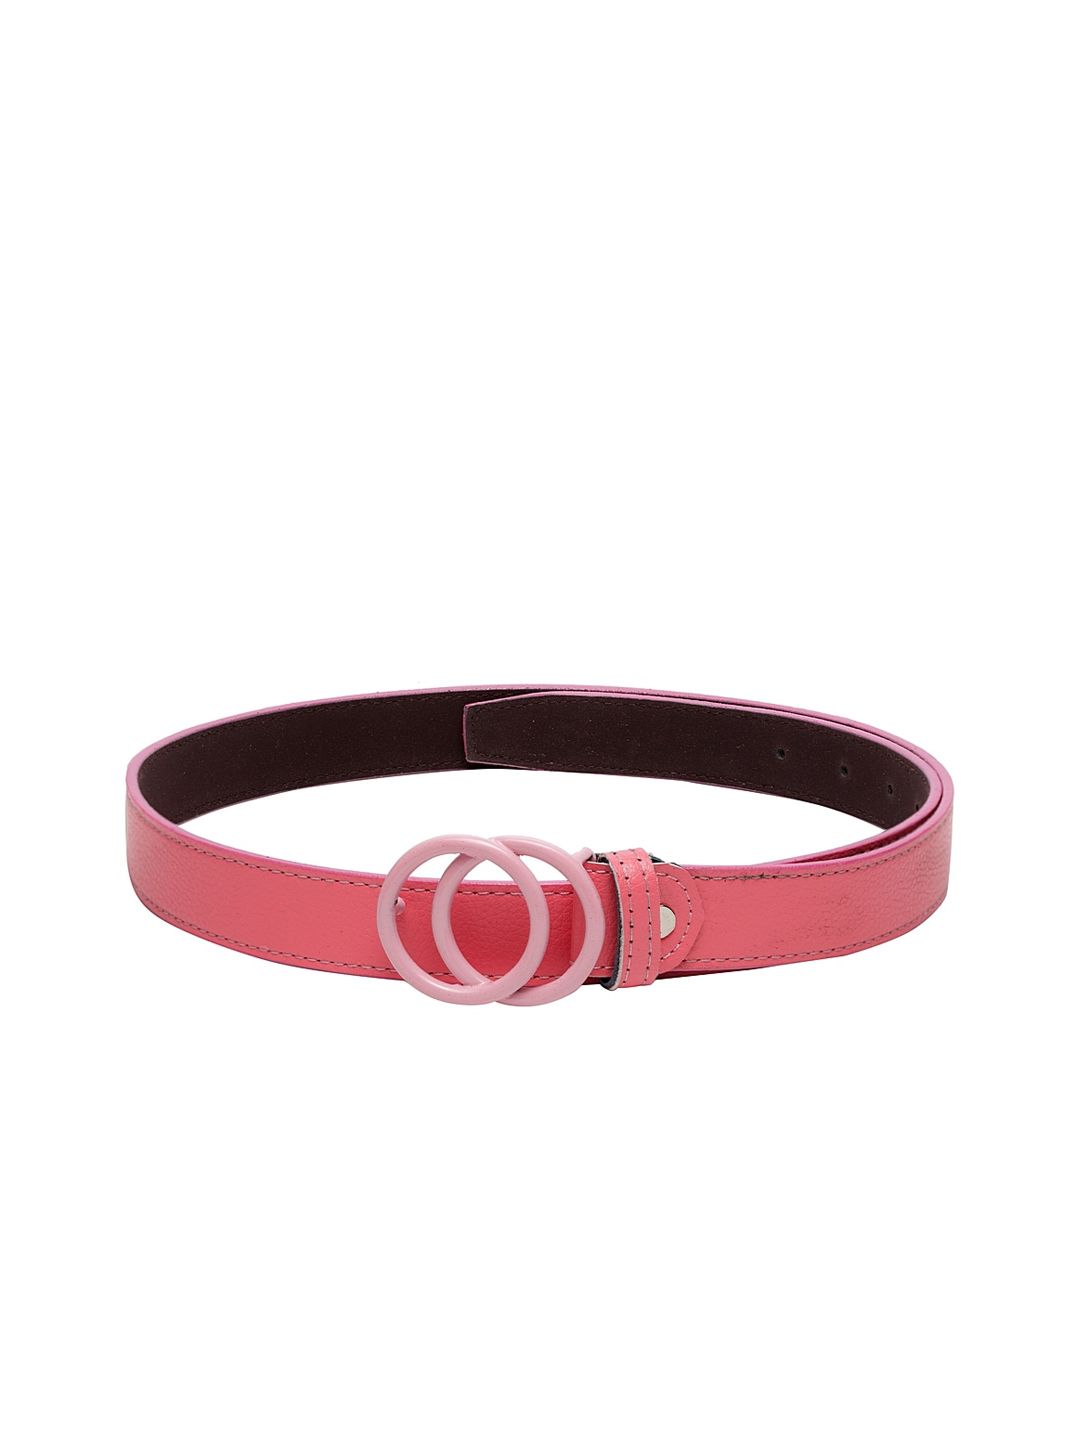 Apsis Women Pink Solid Belt Price in India